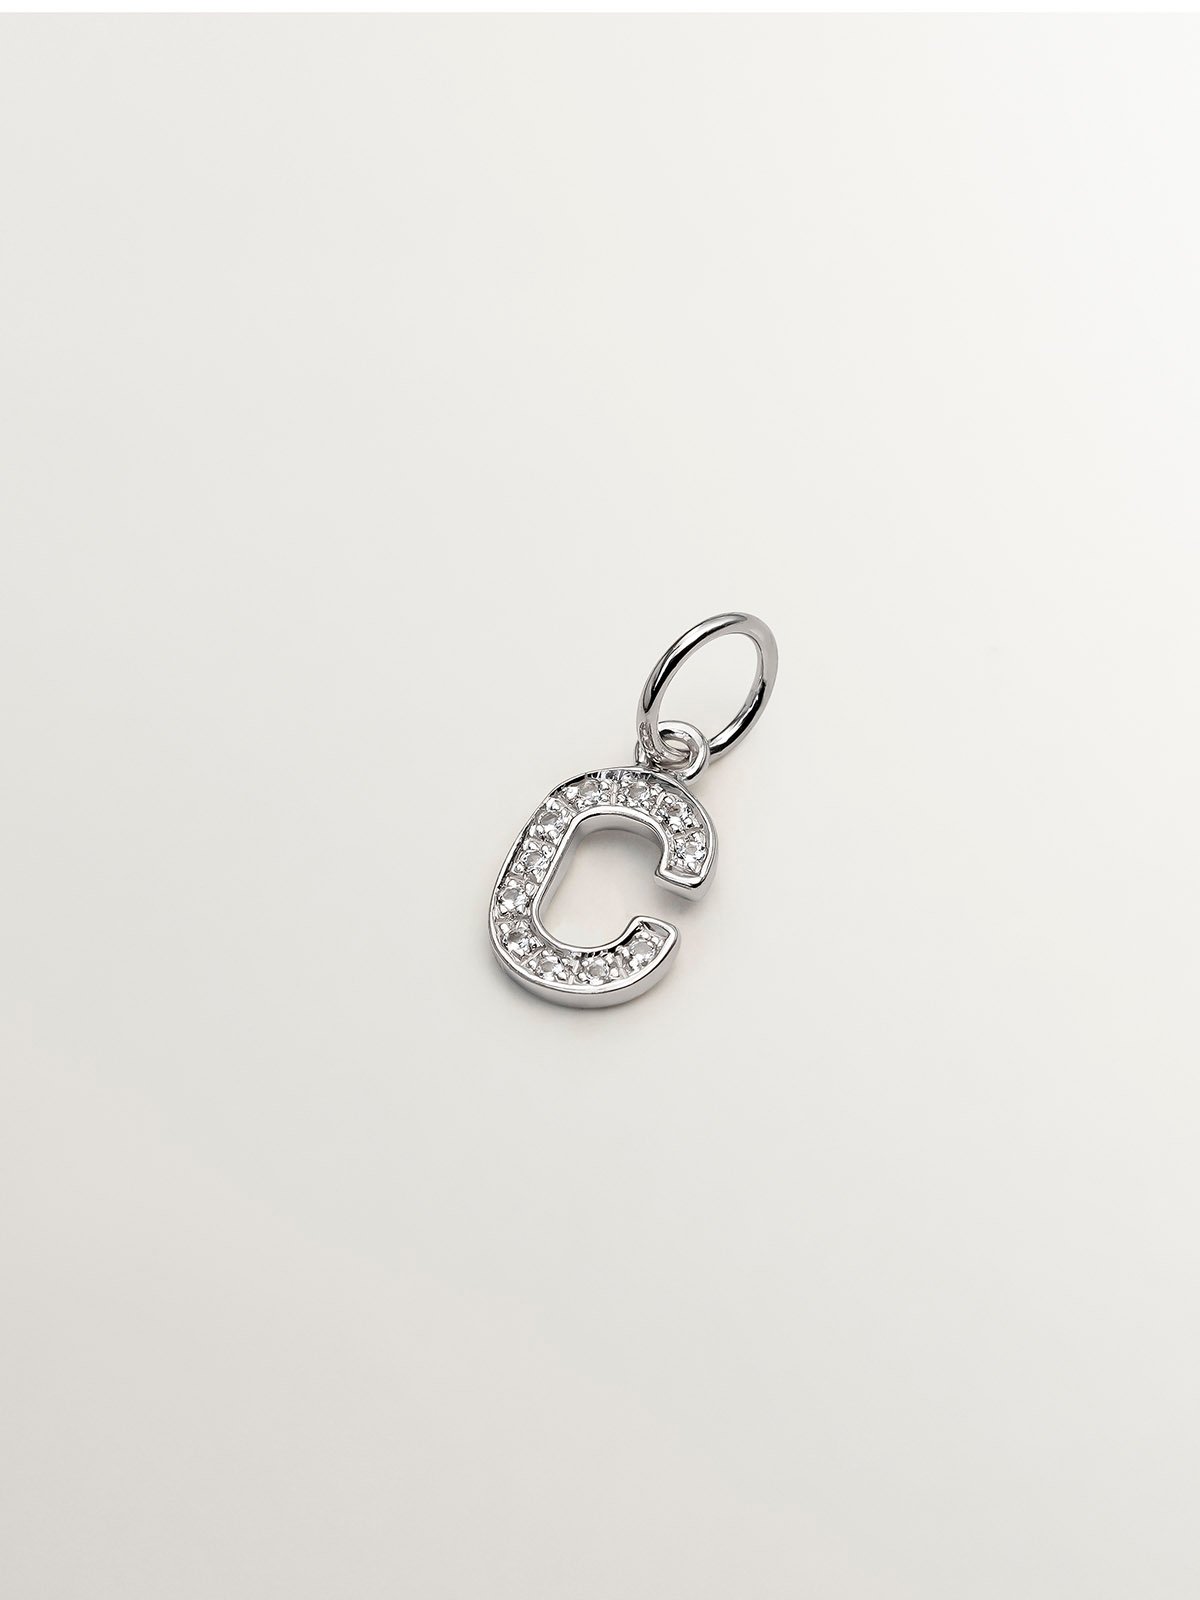 925 Silver Charm and White Topaz Initial C